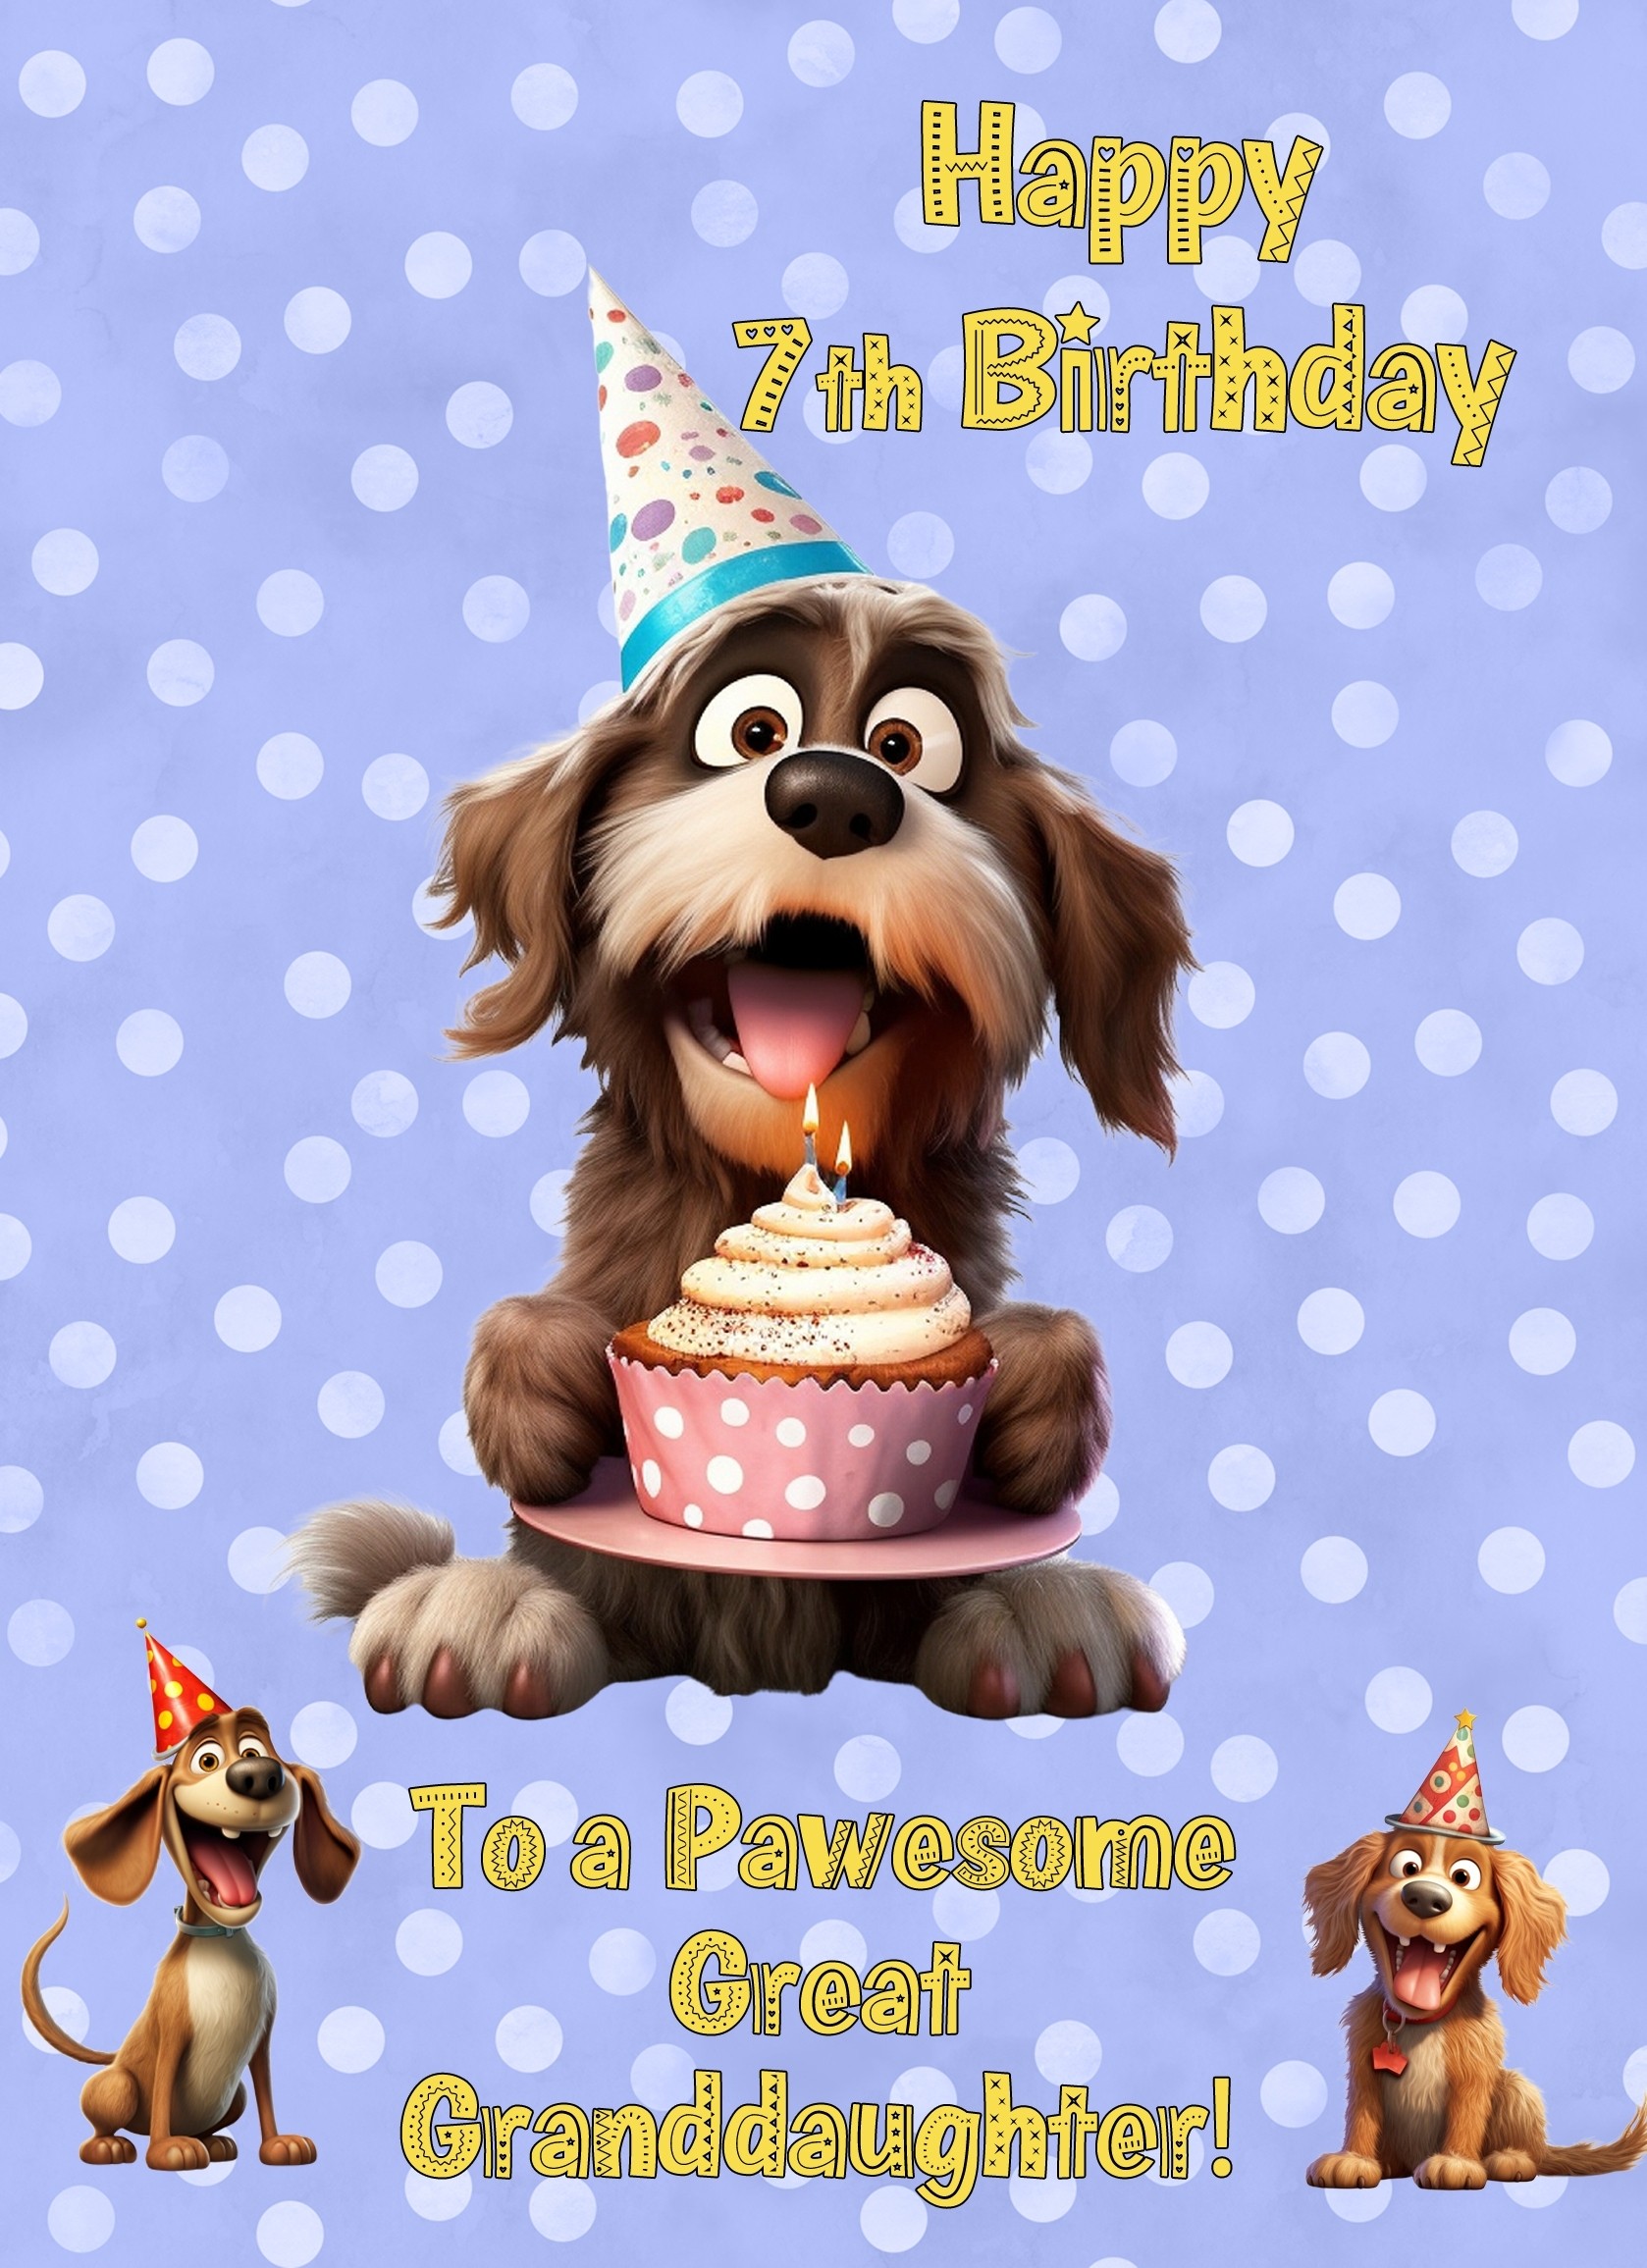 Great Granddaughter 7th Birthday Card (Funny Dog Humour)